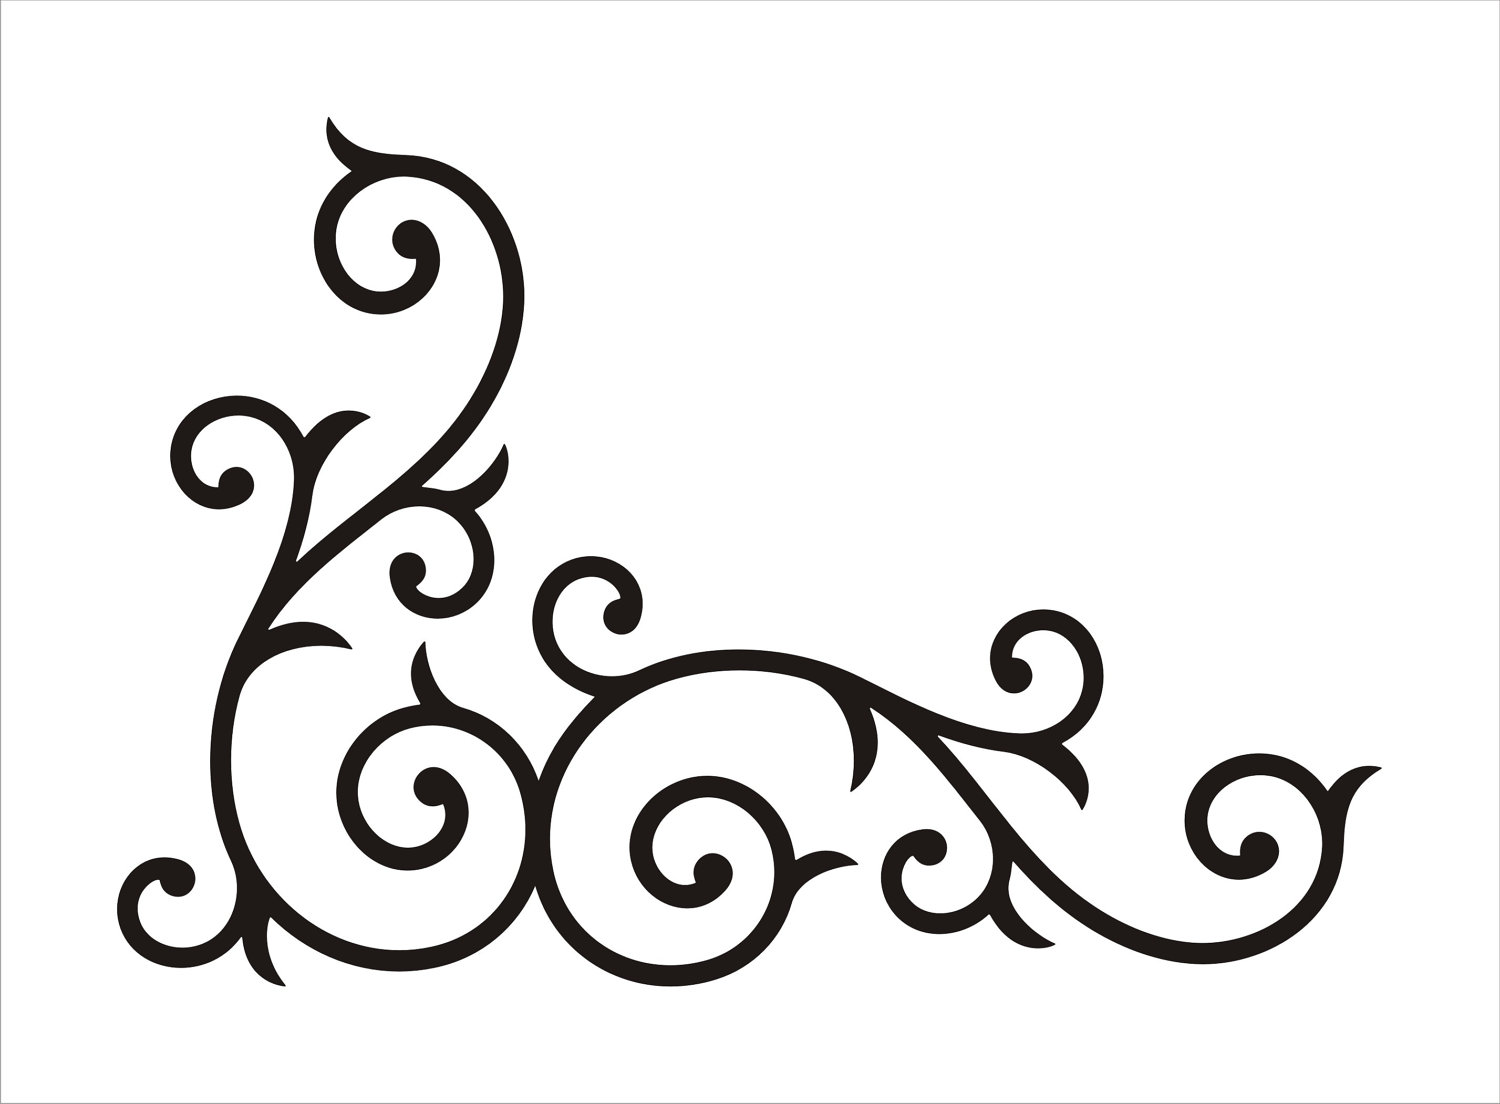 Scrollwork scroll art clipart image - Cliparting.com